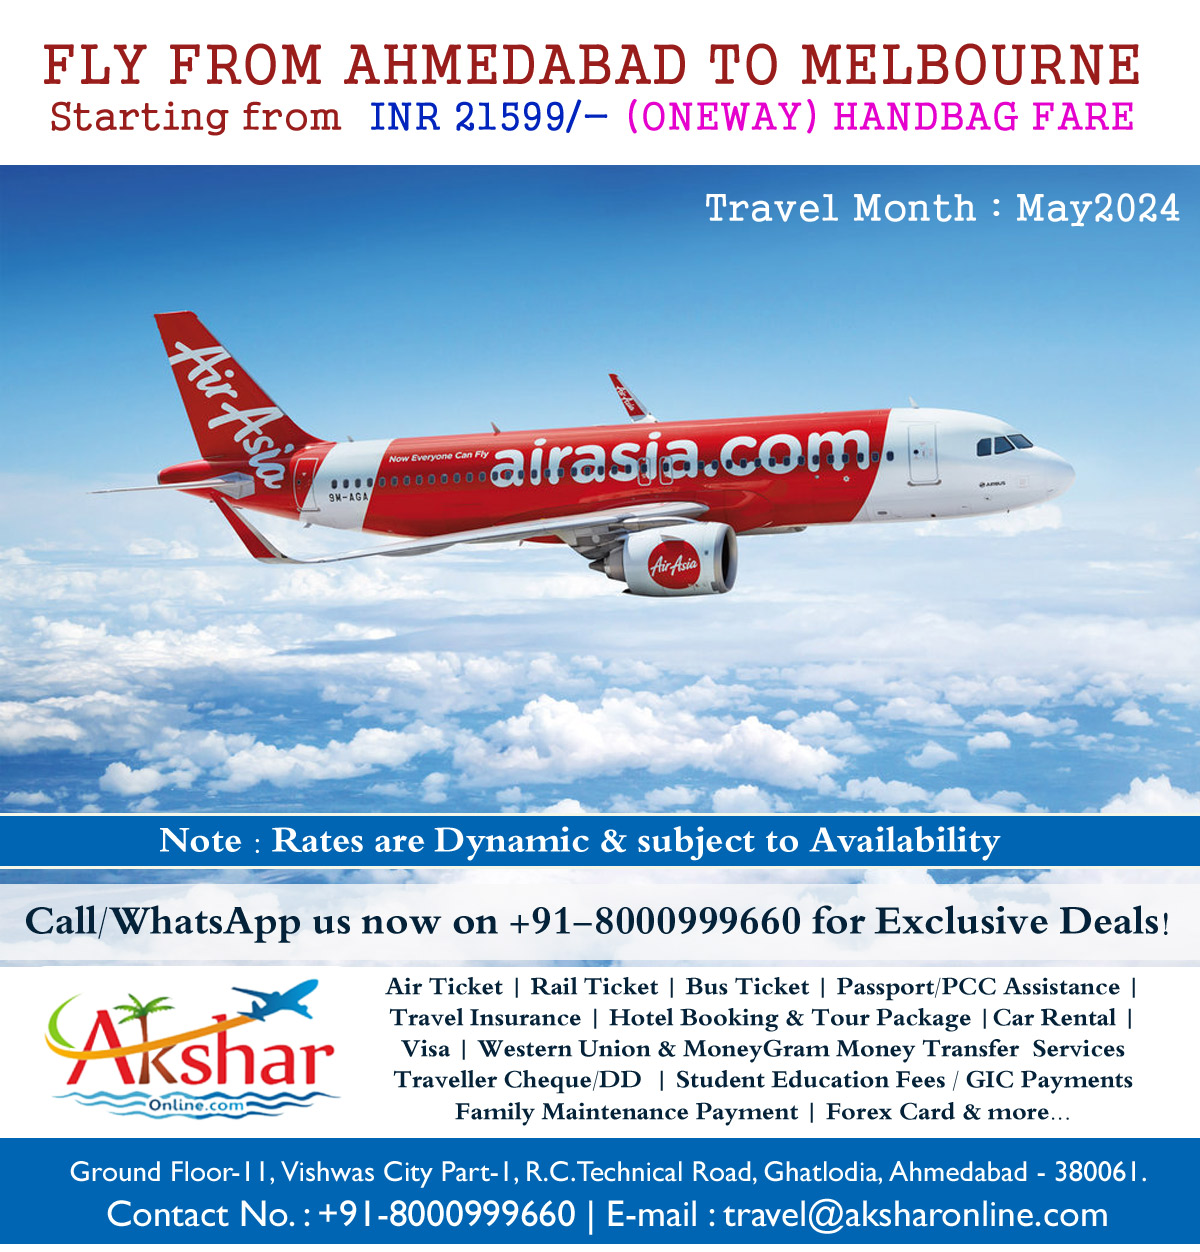 🌟 Exciting News for Travel Enthusiasts! 🌟 Dreaming of exploring the vibrant streets of Melbourne? ✈️ Look no further! 🌏 Fly hassle-free from Ahmedabad to Melbourne with AirAsia Airlines, starting from just INR 21,599/- for a one-way journey with our Handbag Fare! Don't let sky-high fares hold you back from your adventures. ✈️ With unbeatable rates and exceptional service, your journey to Melbourne is now more affordable than ever! For the best rates on domestic and international flights, contact us today at +91-8000999660 via Call/WhatsApp. Let's turn your travel dreams into reality! ✨ Book now and let the adventures begin! 🎒🌍 #TravelWithEase #AirAsia #AhmedabadToMelbourne #AffordableTravel #aksharonline #indiatoaustraliaflight #indiatoaustralia #flightdeals #flight #travellife #australia #CanadaStudentVisa  #internationalstudent #australiatravel #internationalpackage #allinclusive #booknow #deal #cheaptravels #cheapflights #internationalholidaysday #indiatours #limited #indiantravellers #travel #flight #cruise #cheapdeals